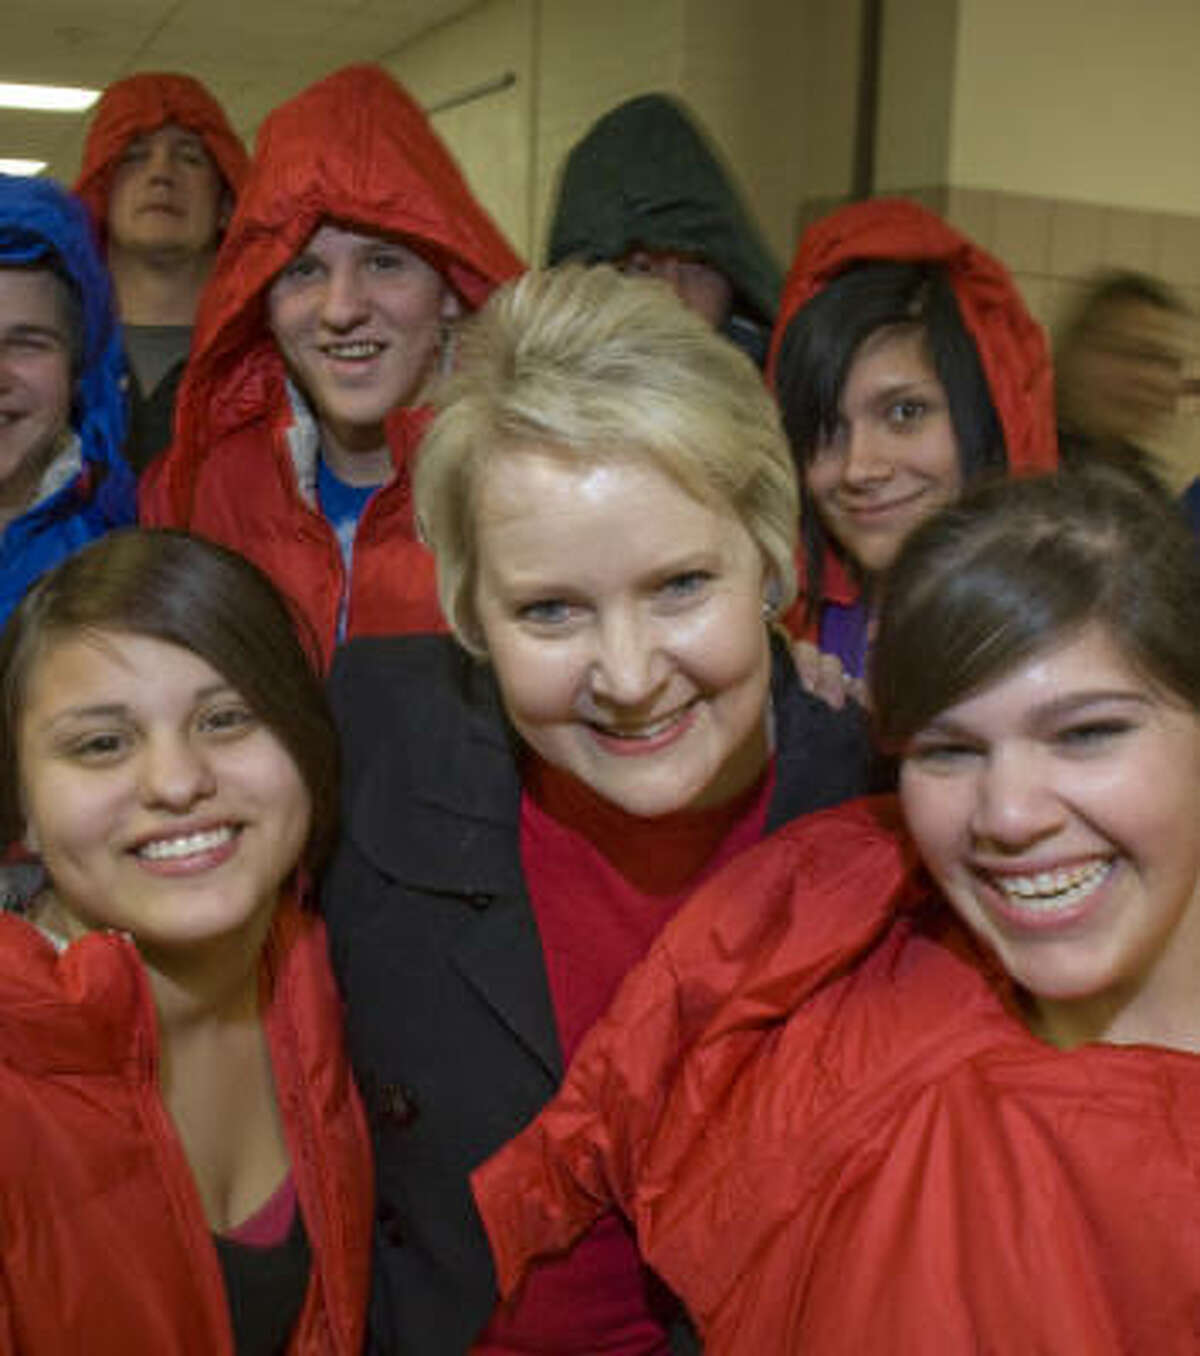 Karen Anderson turned her $100 into $36,000 to buy coats for every student at Galveston's Ball High School, and then some.